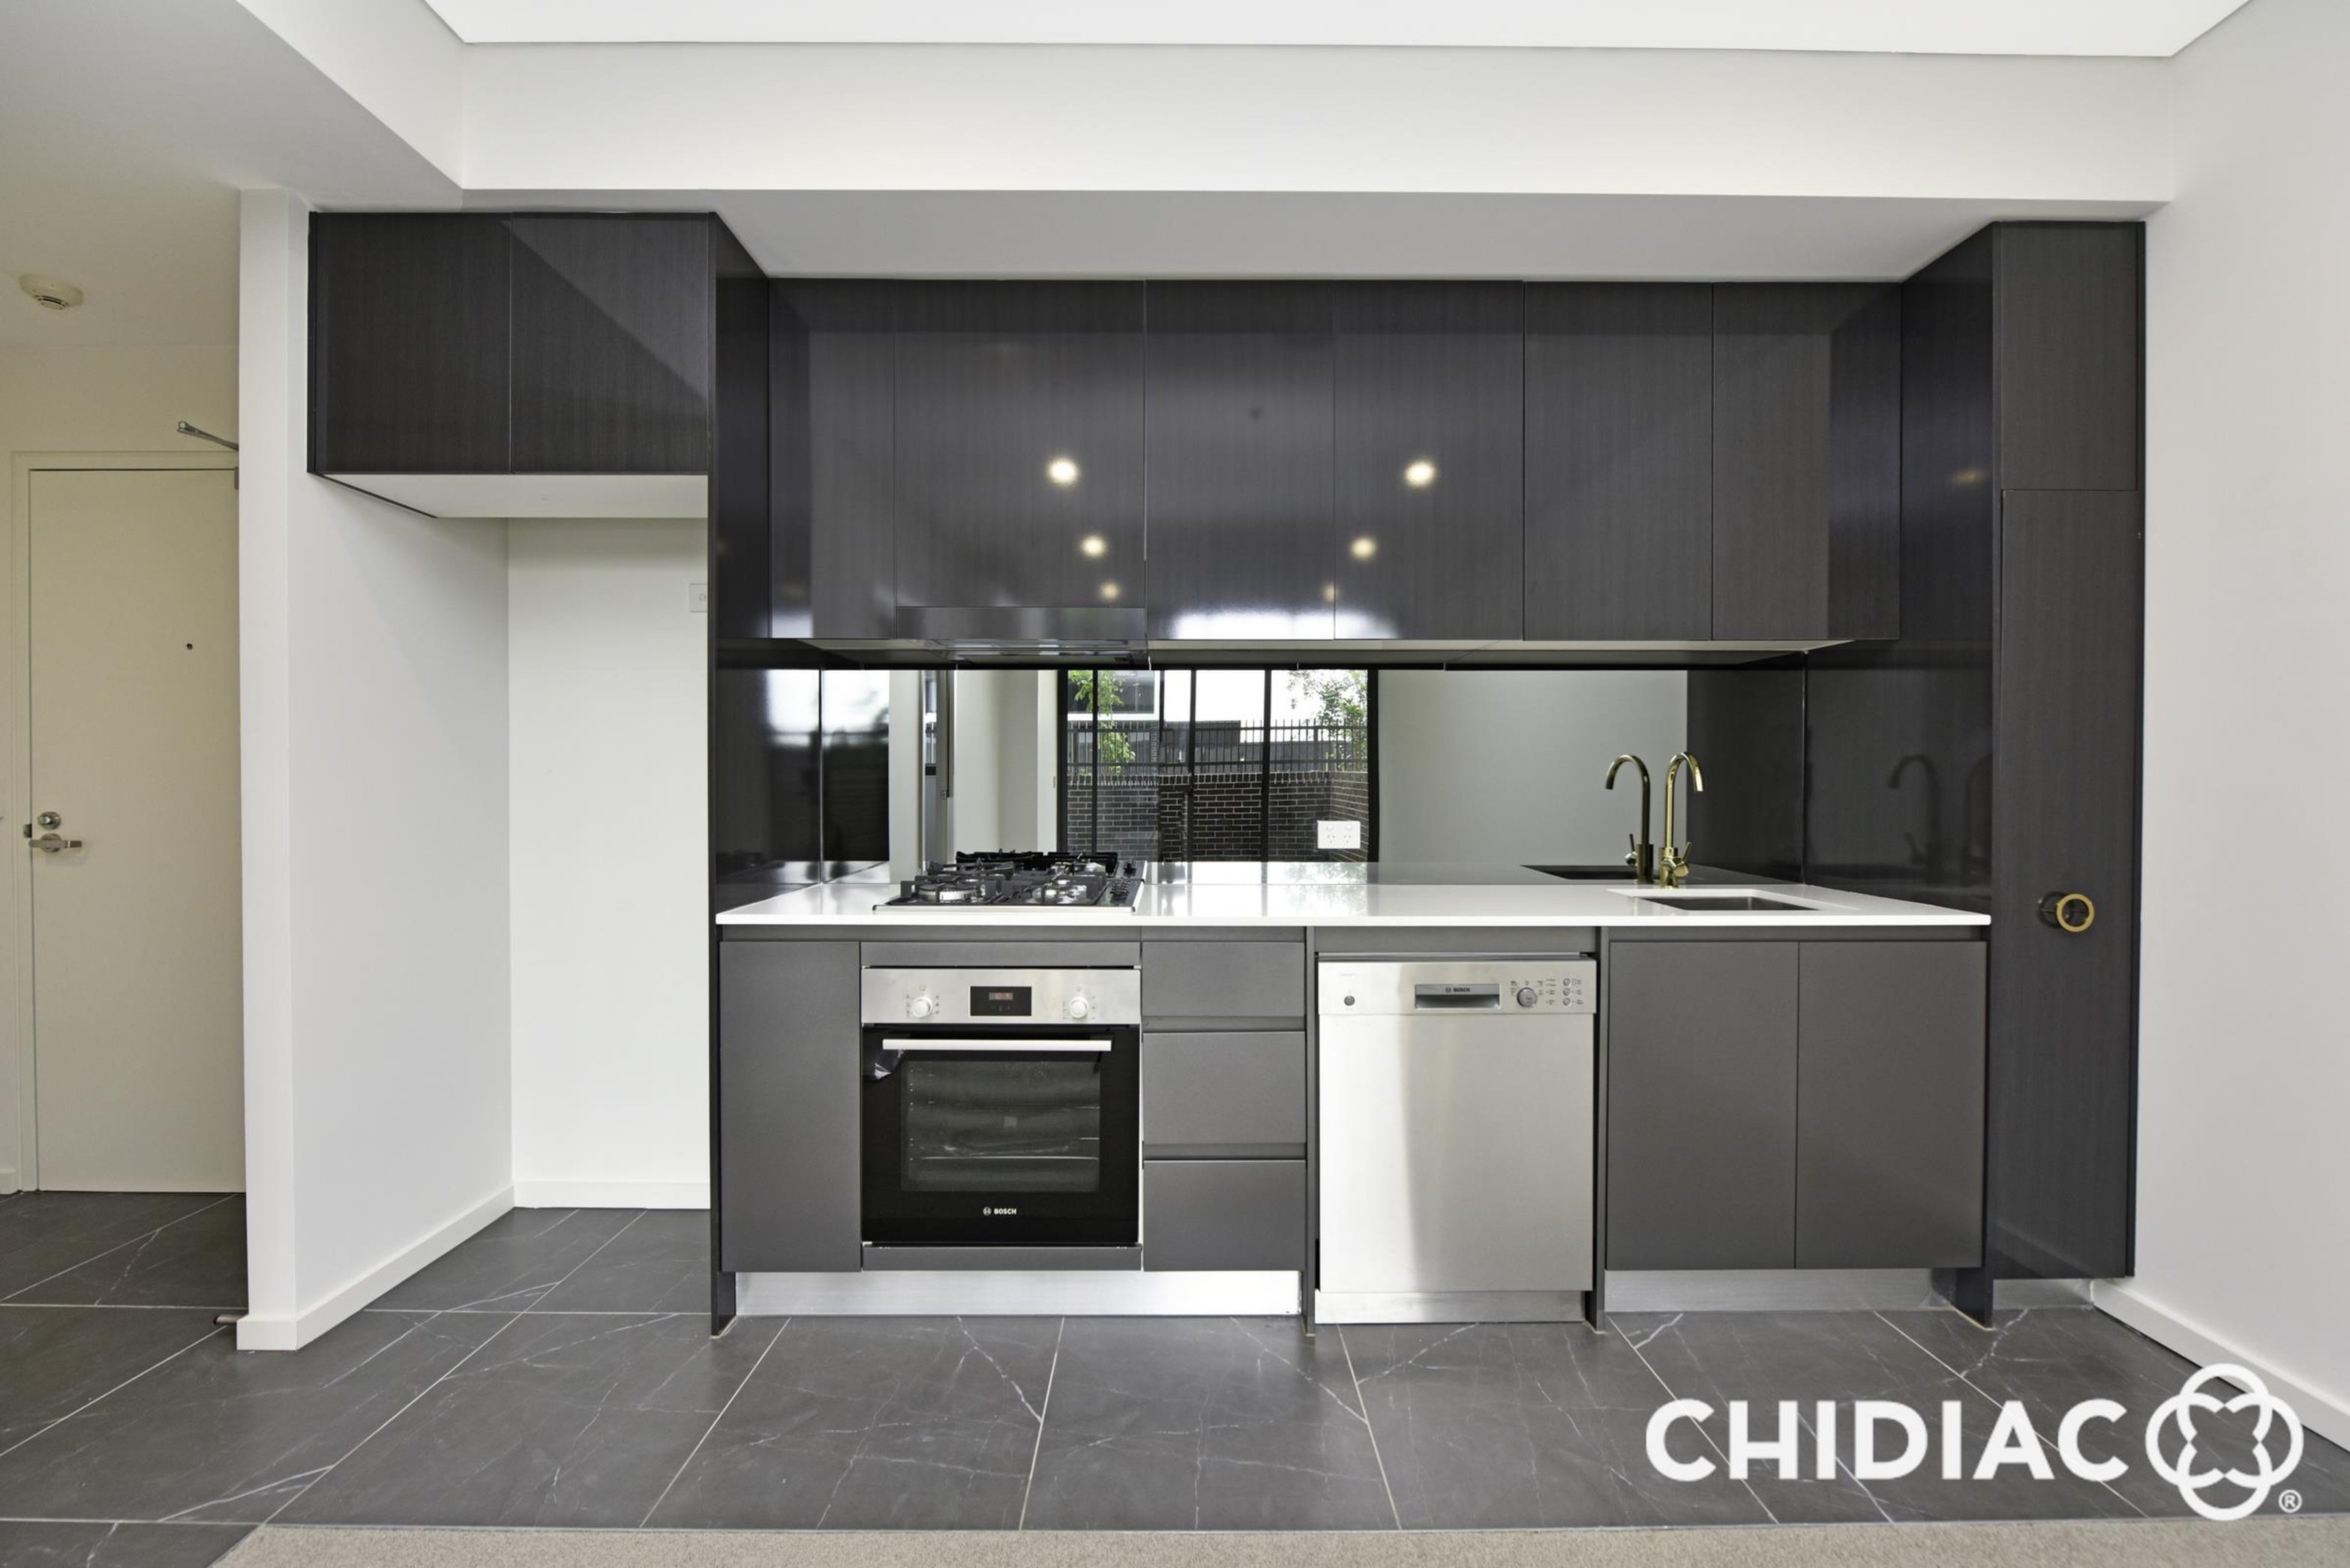 J7077/17 Amalfi Drive, Wentworth Point Leased by Chidiac Realty - image 3